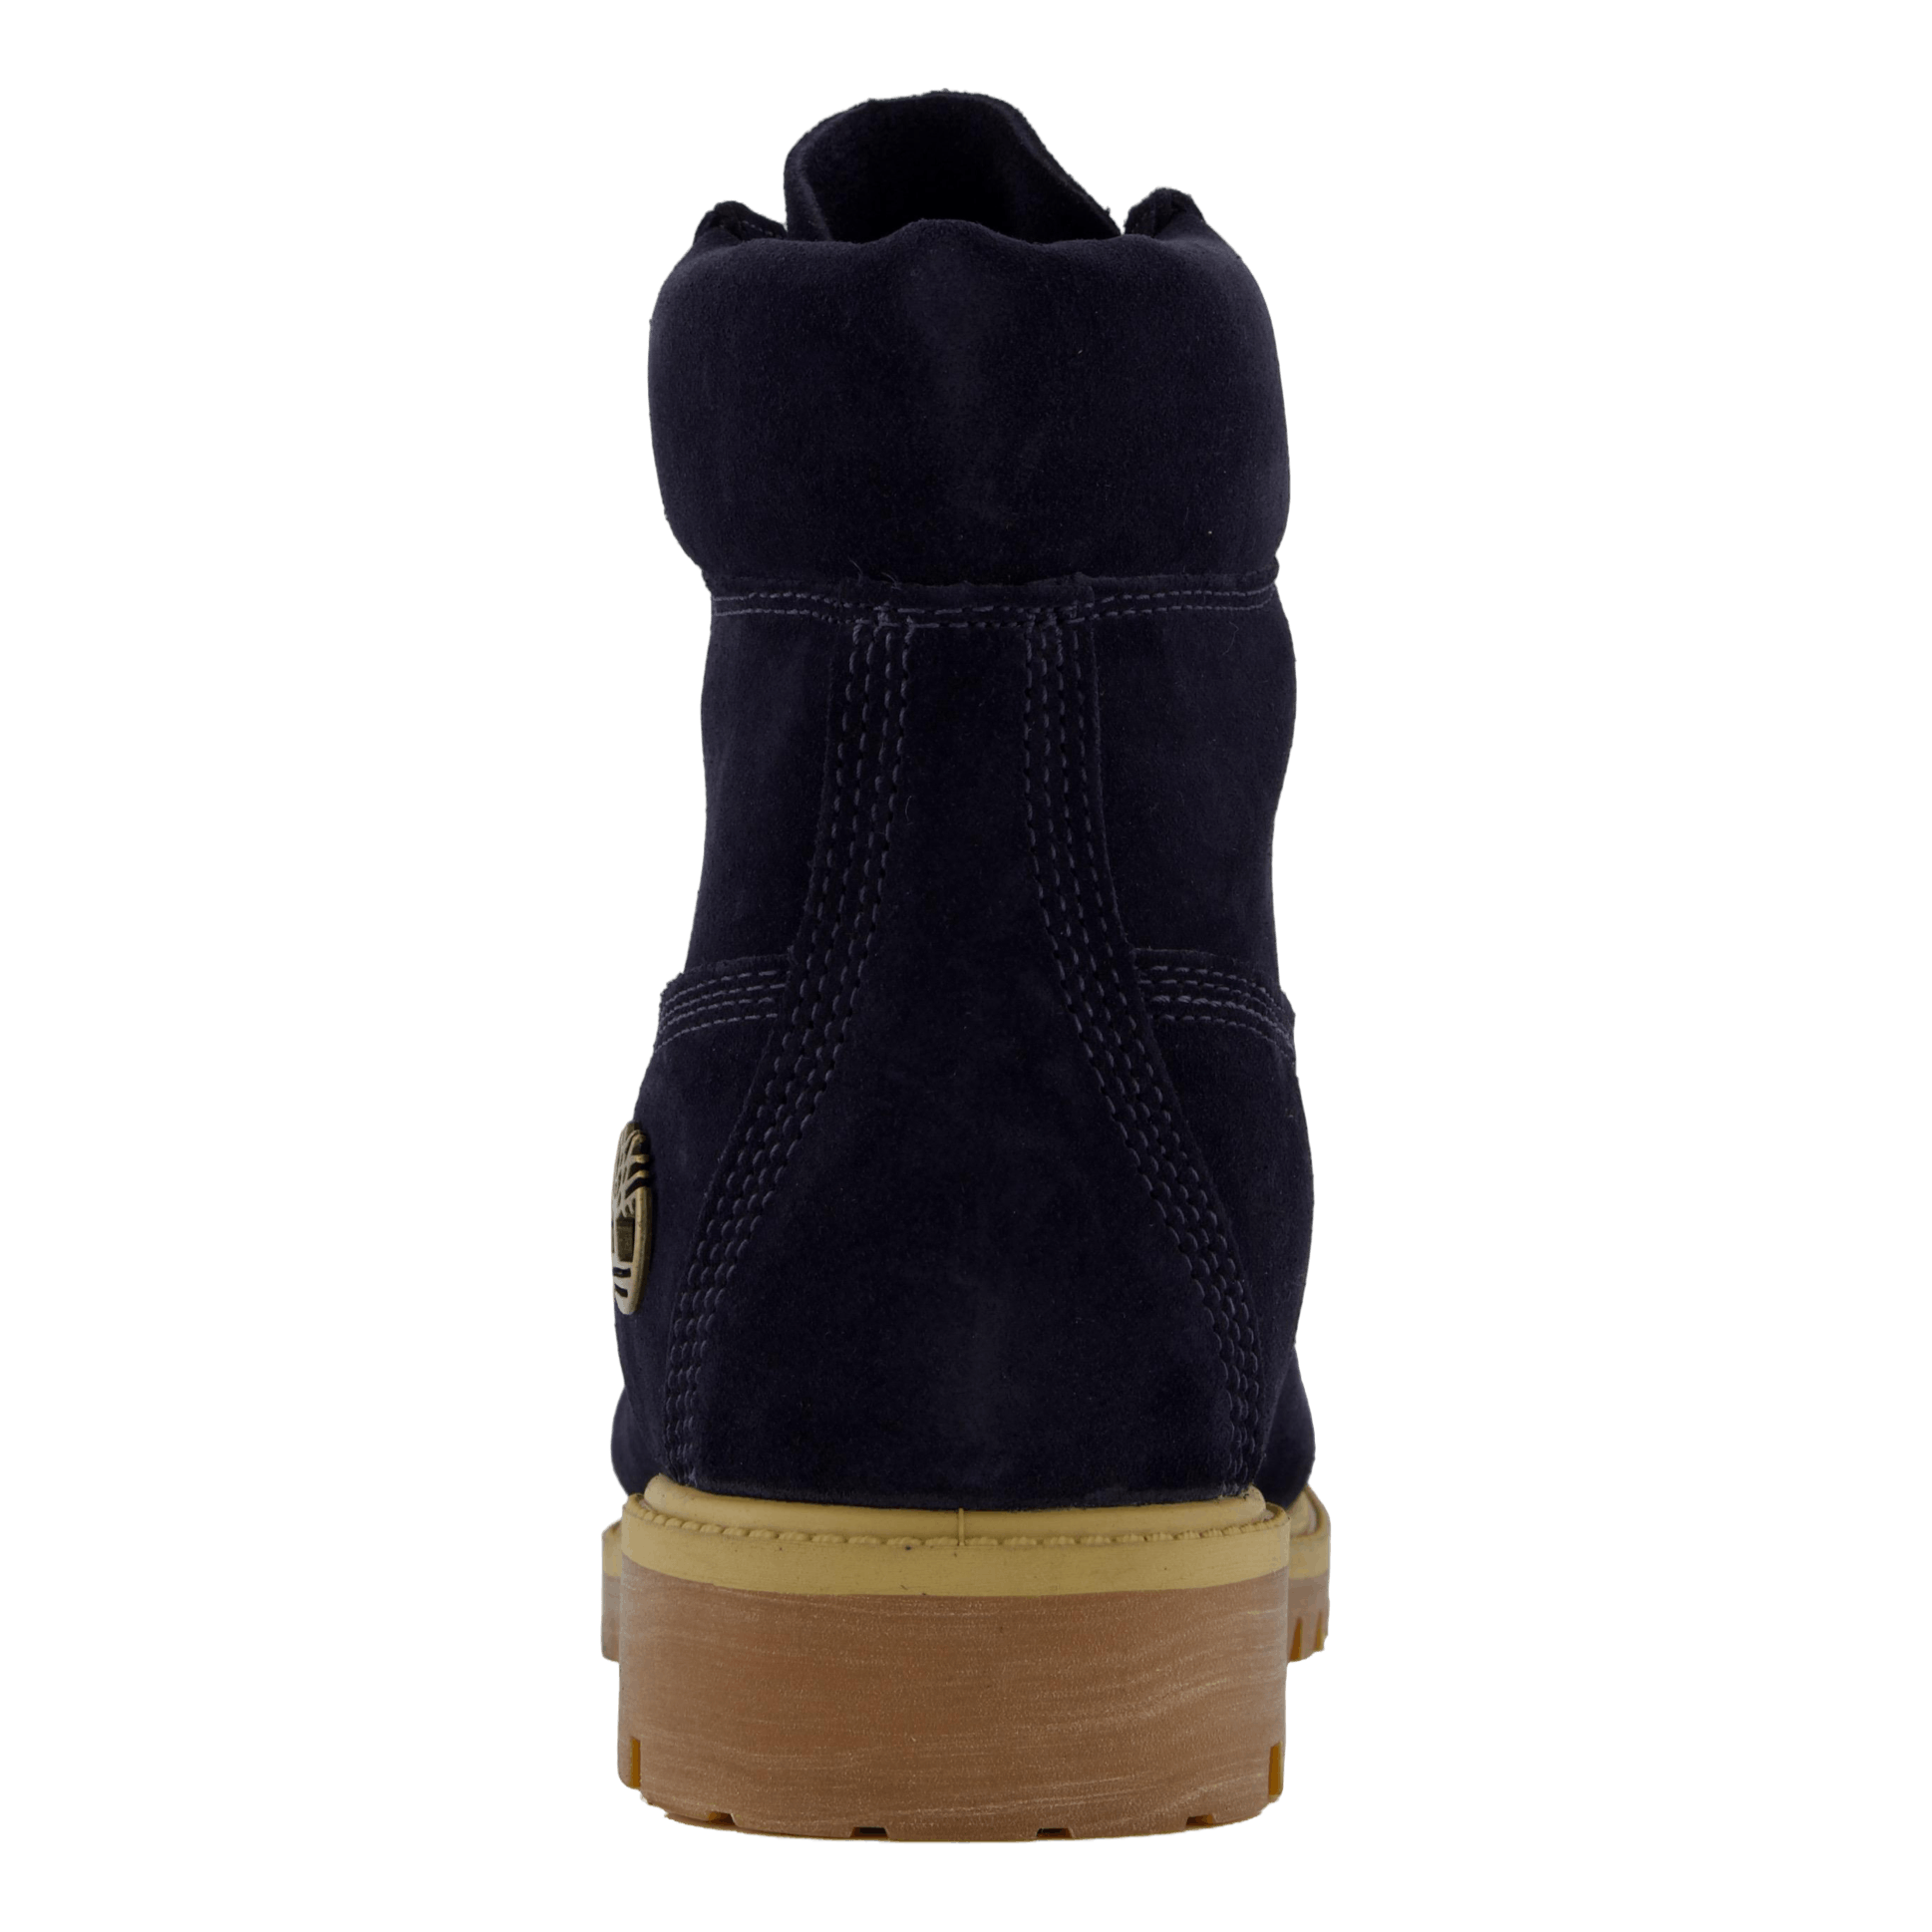 Timberland Heritage 6 Inch Lac Dark Blue Suede